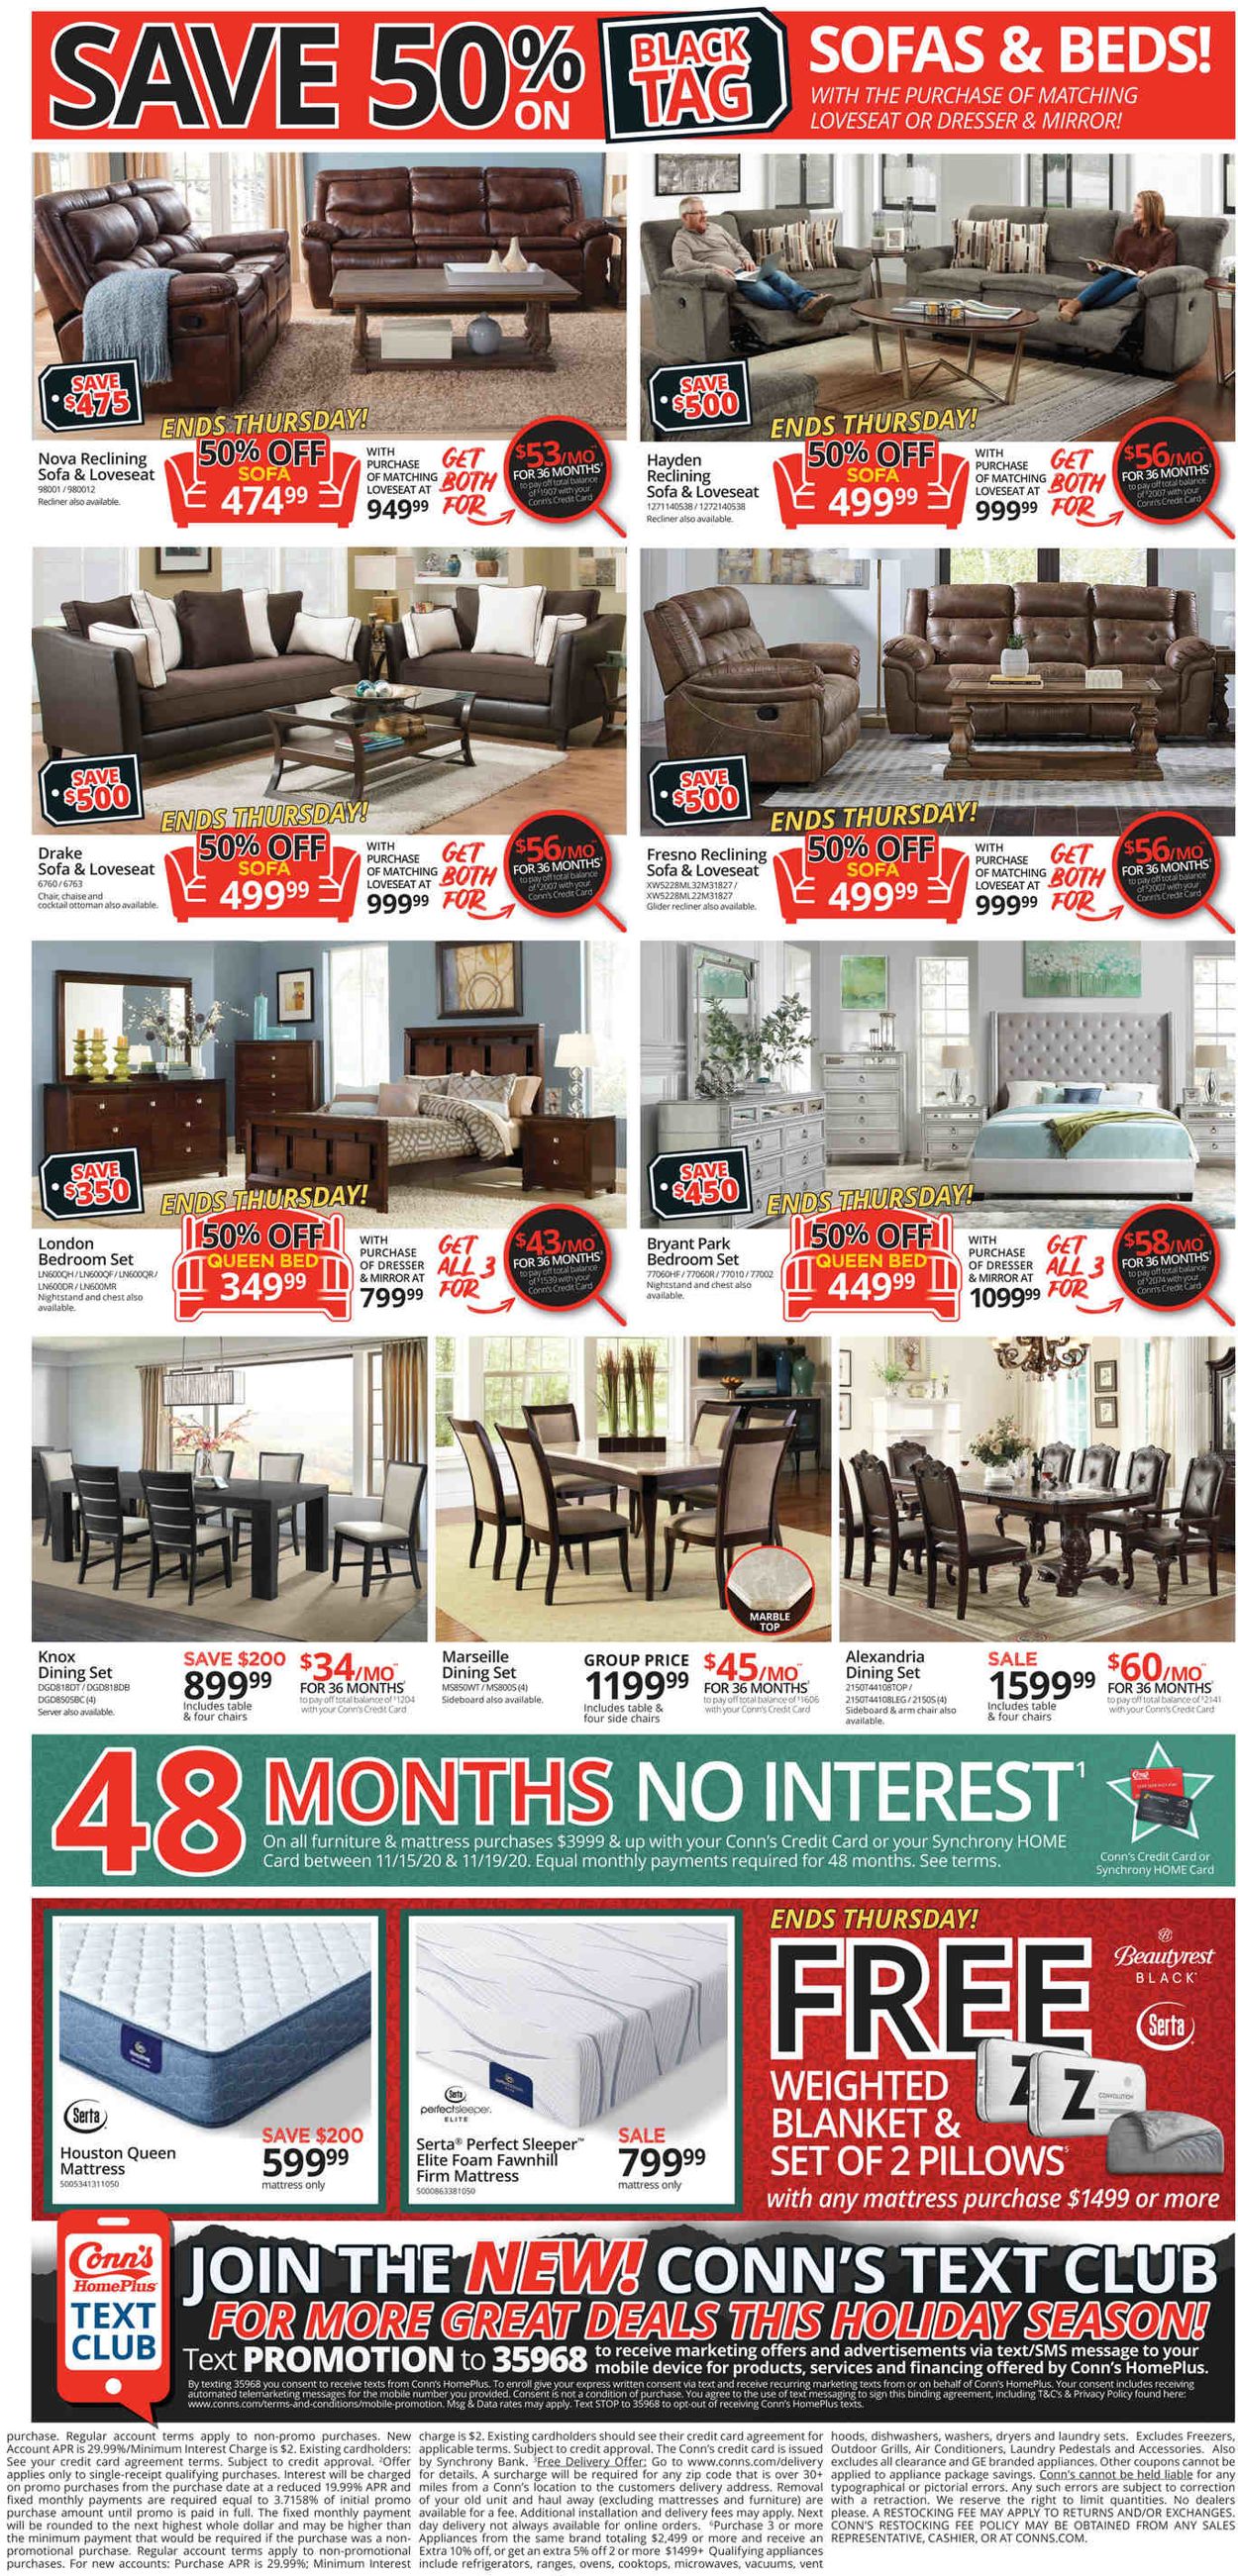 Conn's Home Plus Black Friday 2020 Weekly Ad Circular - valid 11/15-11/19/2020 (Page 3)